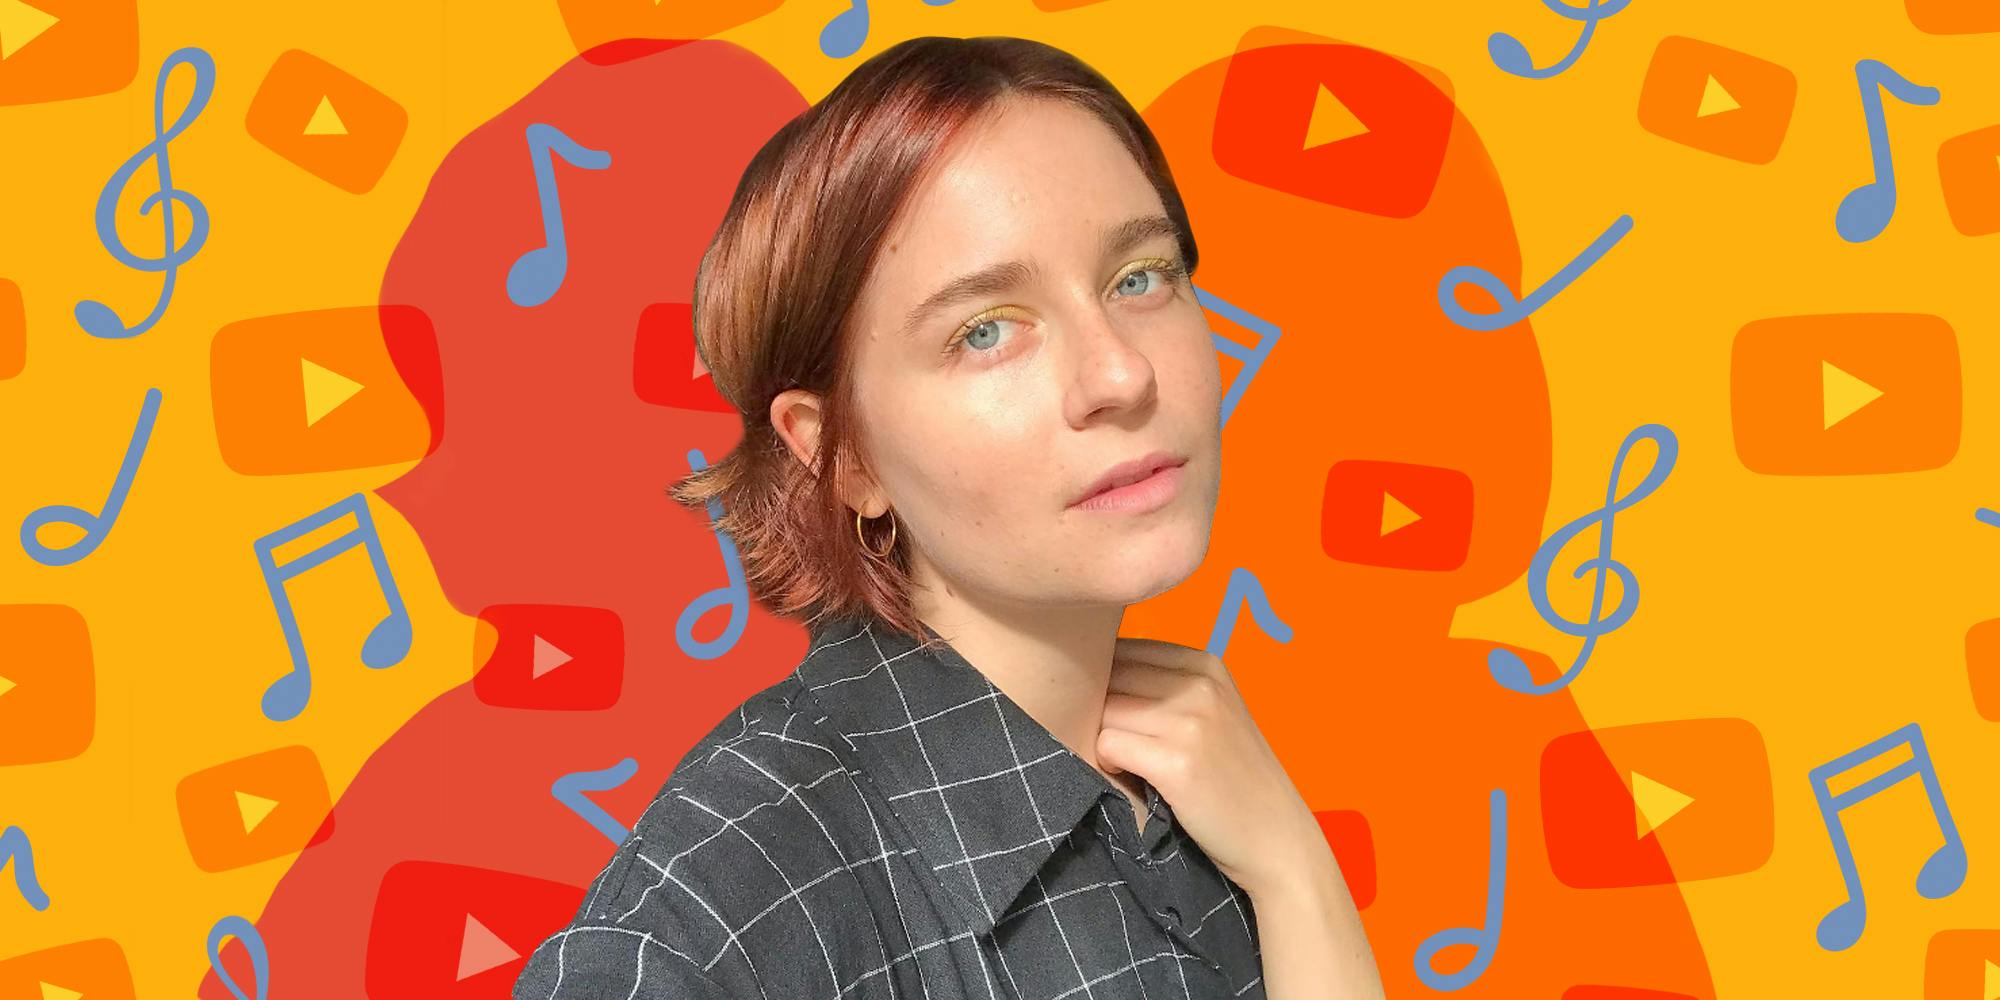 Lessons in Internet Authenticity With Haley Blais at SXSW